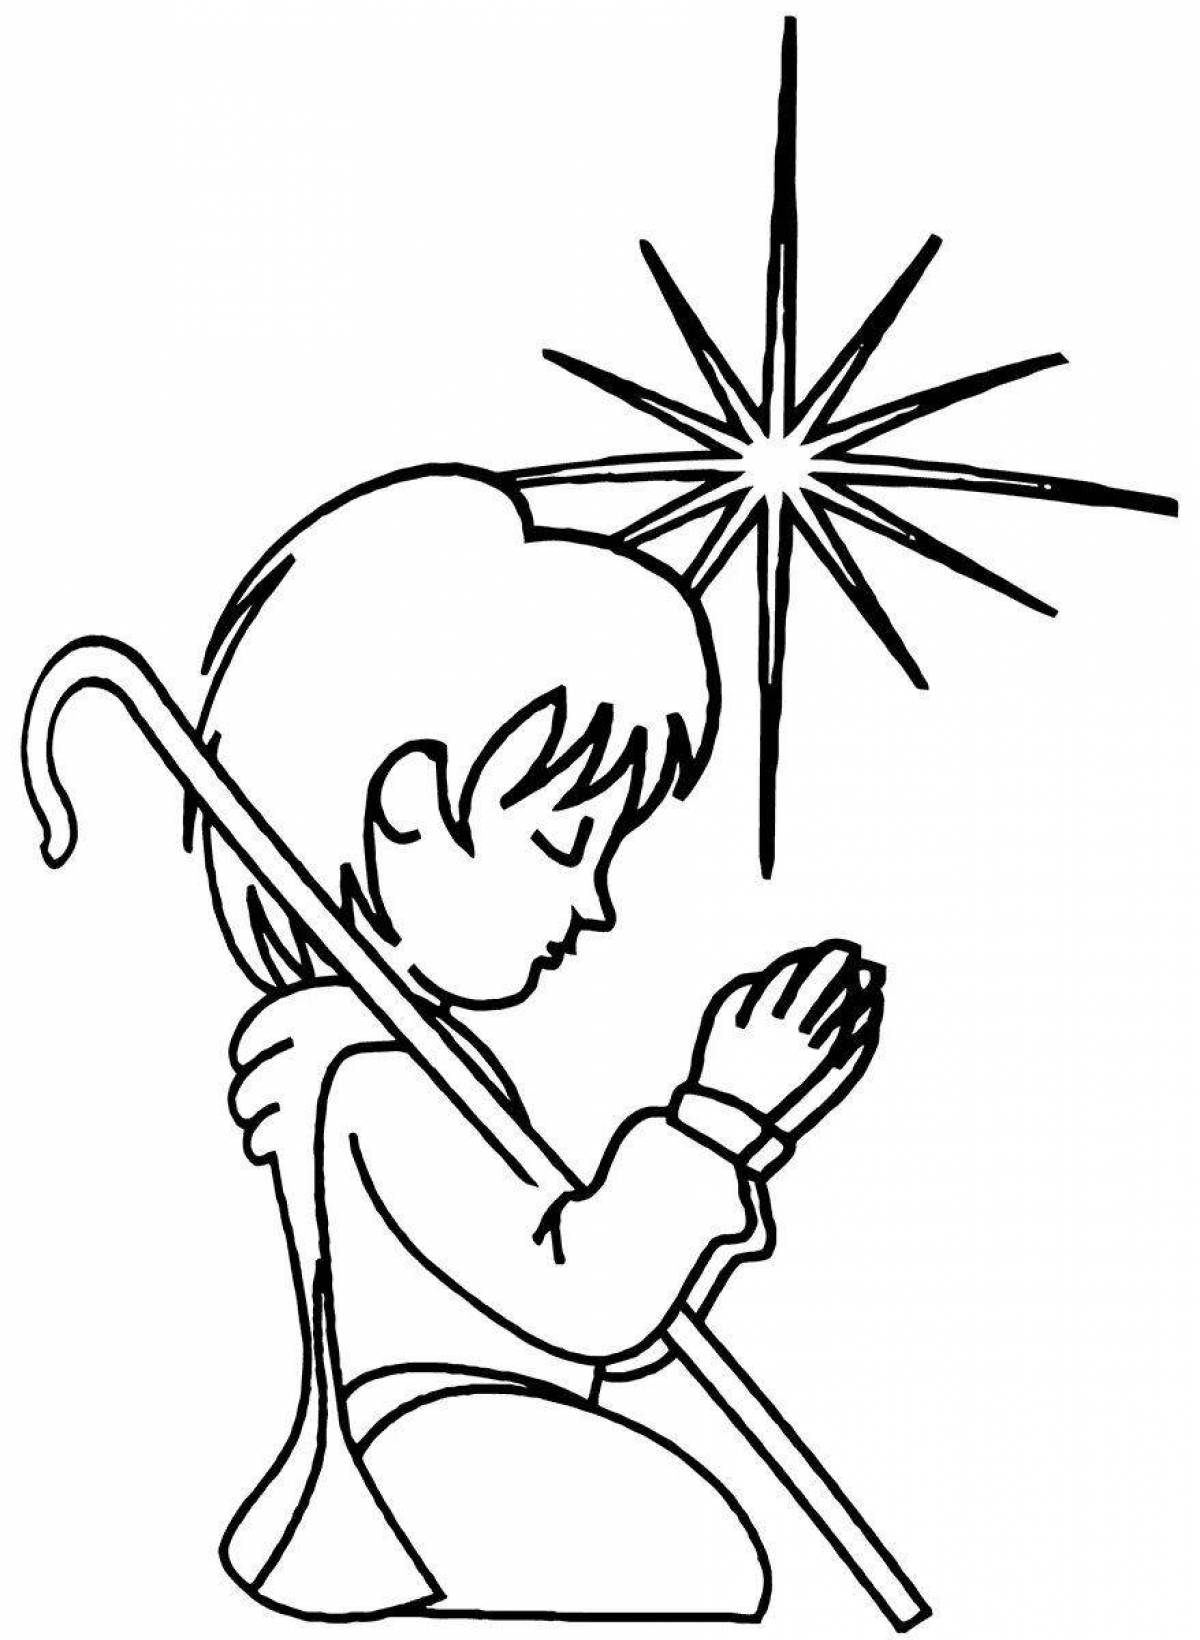 Fabulous Christmas star coloring pages for kids